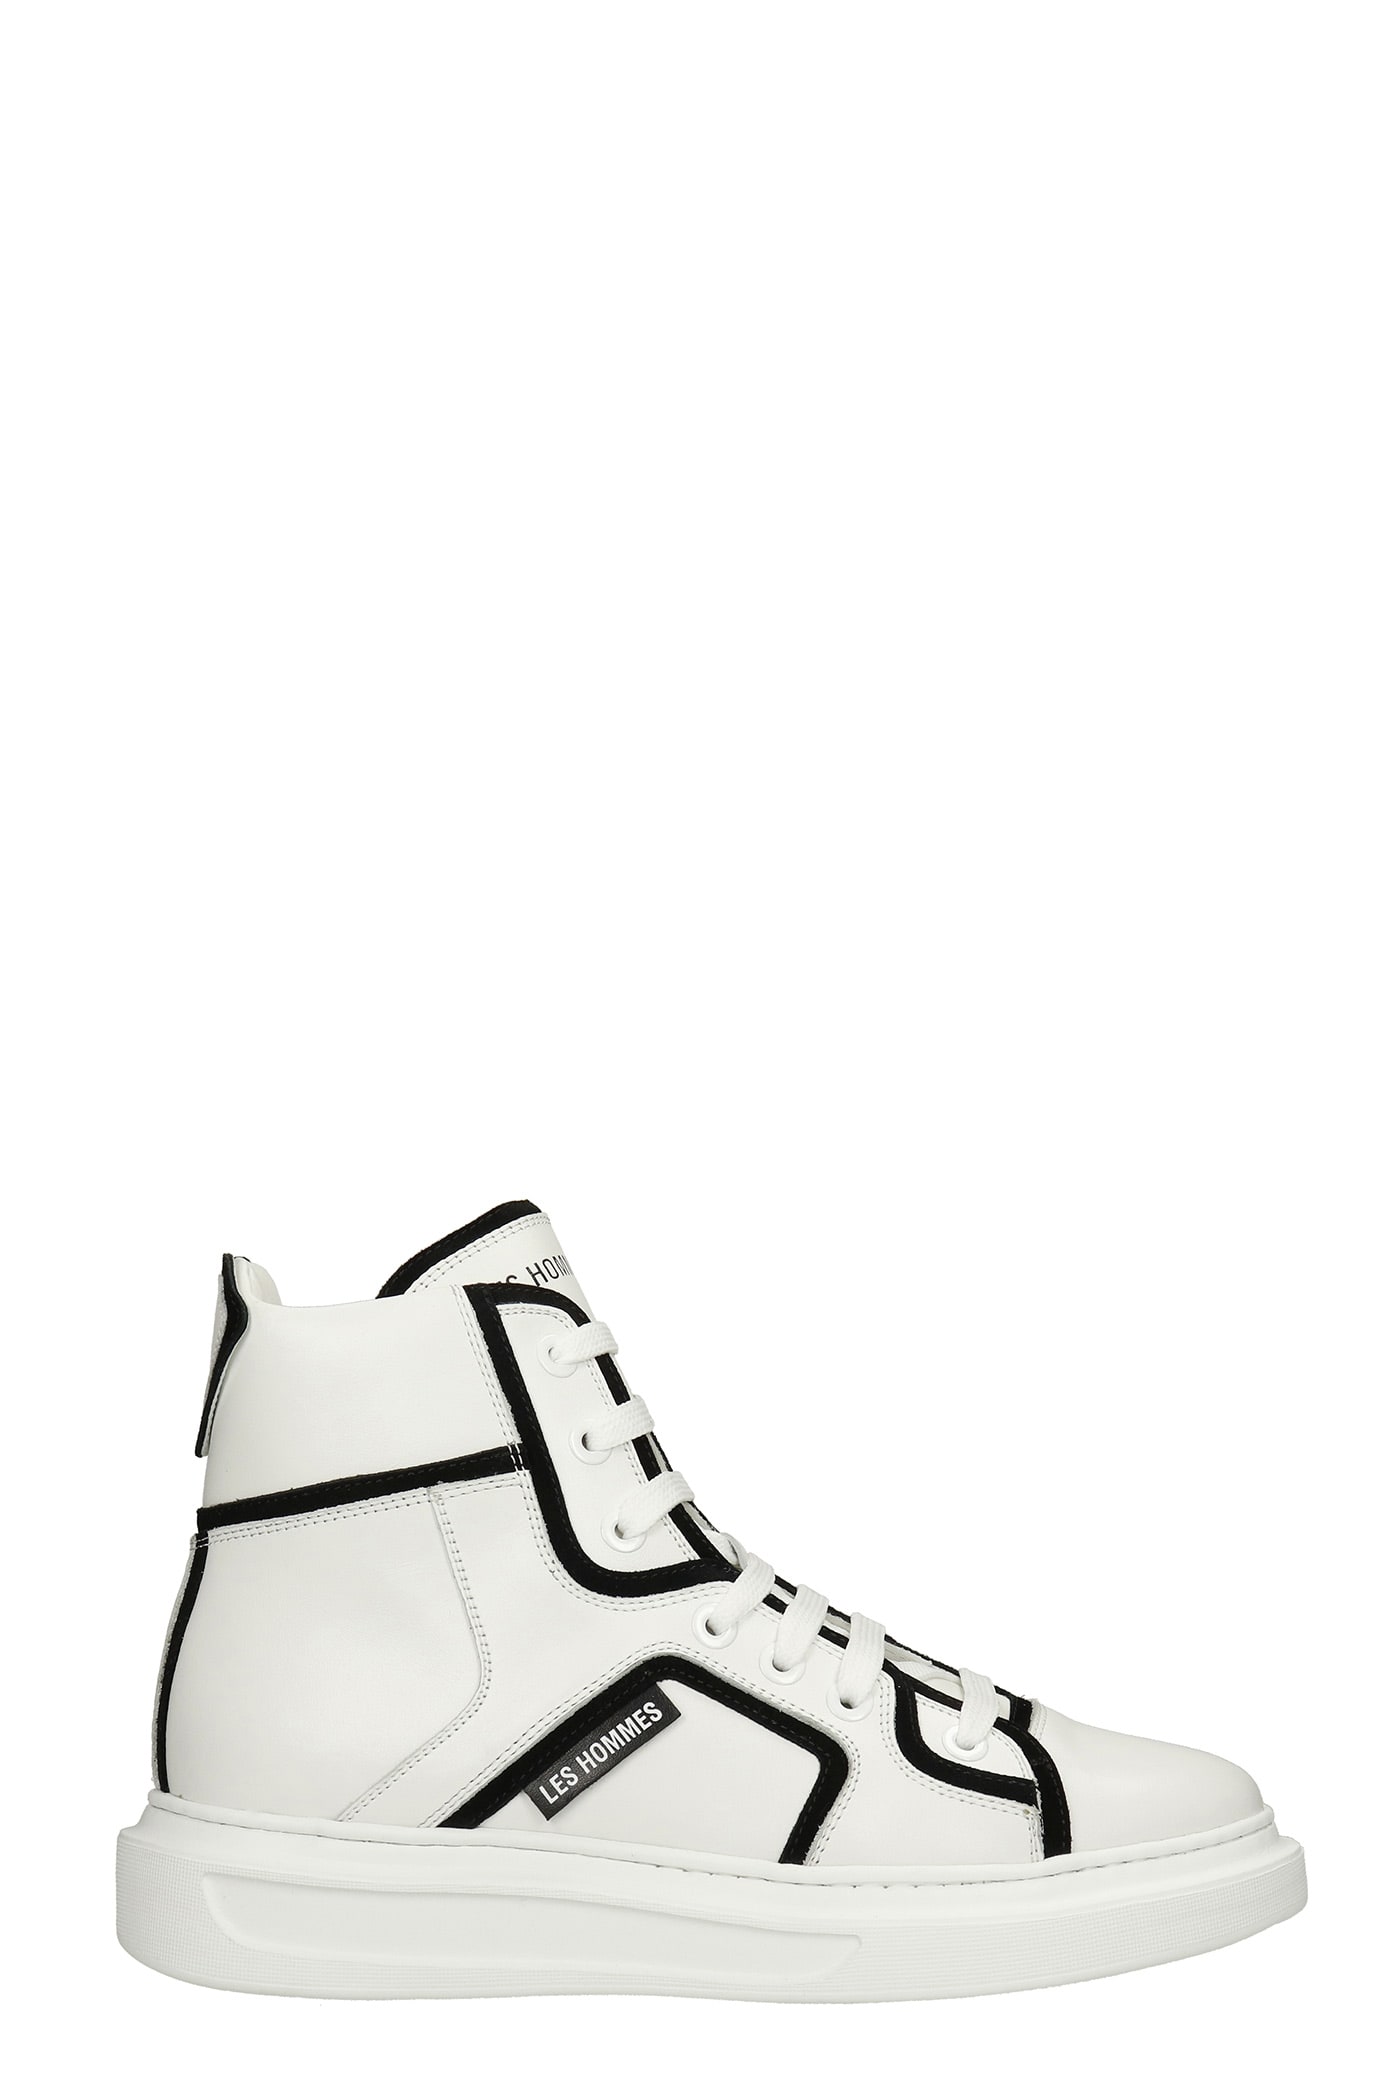 Les Hommes Sneakers In White Leather